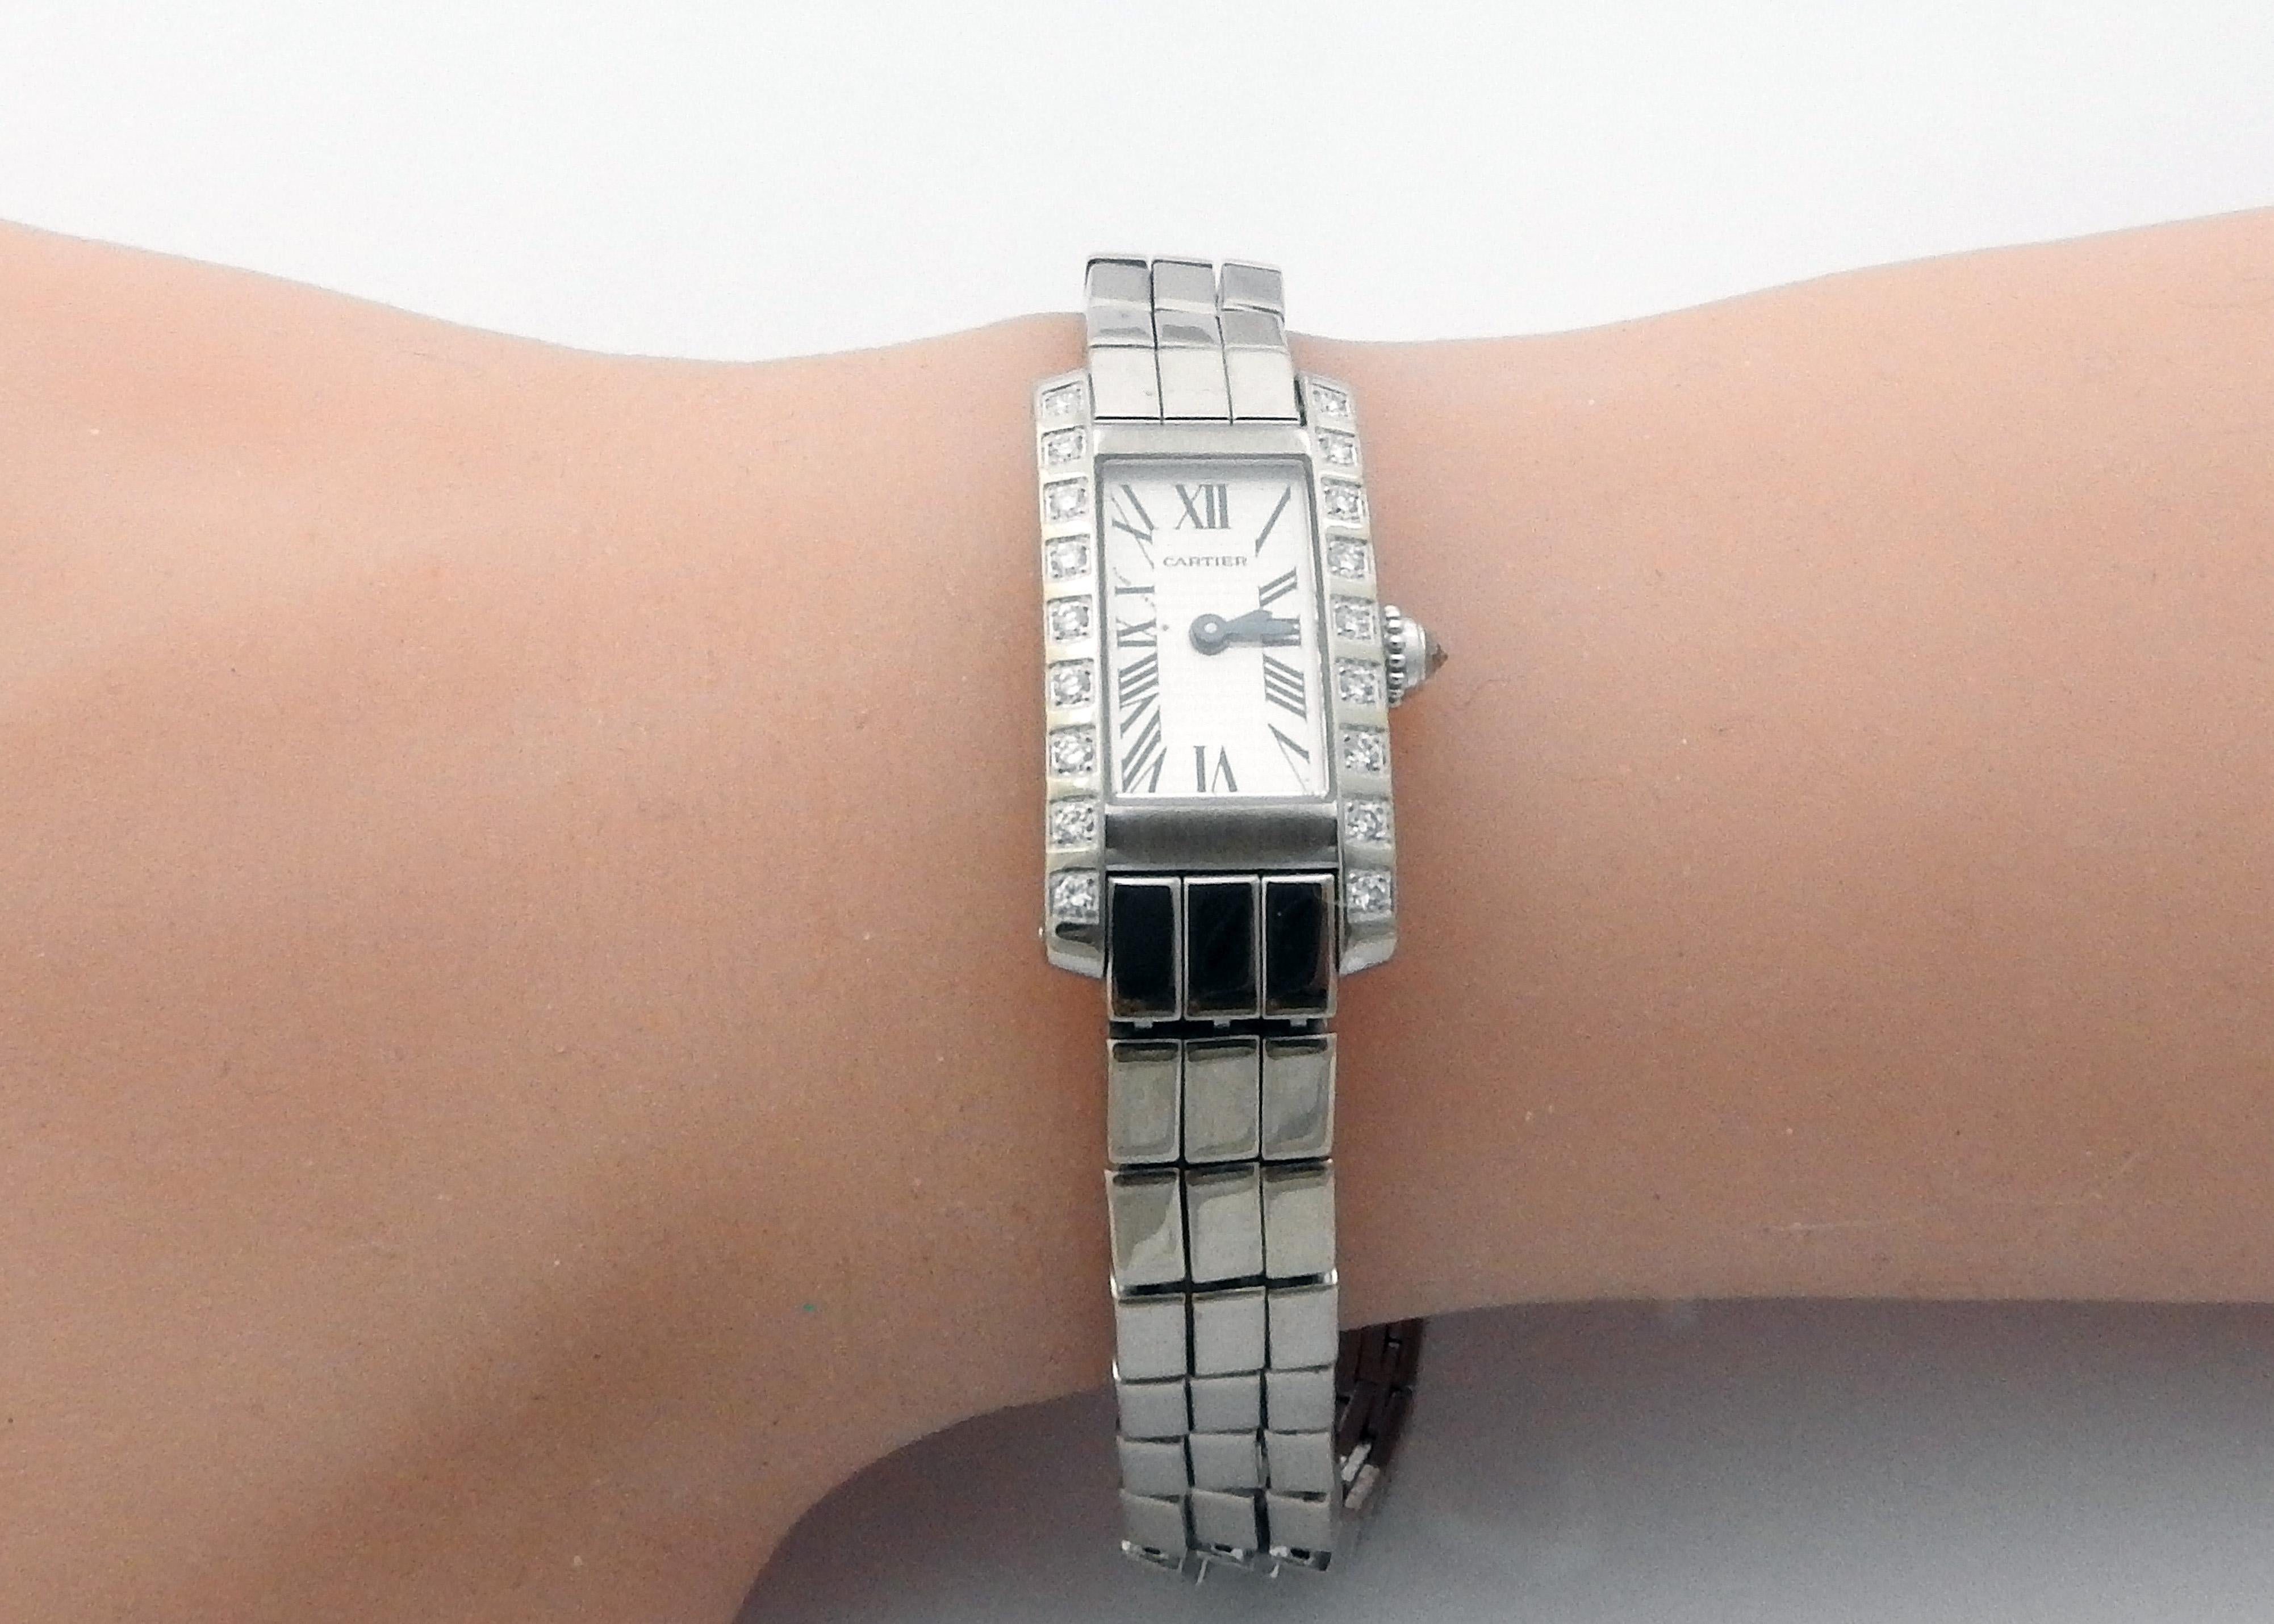 Cartier Tank Allongee Lanieres 18K White Gold and Diamond Ladies Watch

Model: W15364W3 / 2544
Serial: 13930CE

This authentic Cartier Tank watch is set in 18K white gold

Bezel is set with 18 round brilliant diamonds. 

Crown is set with one round